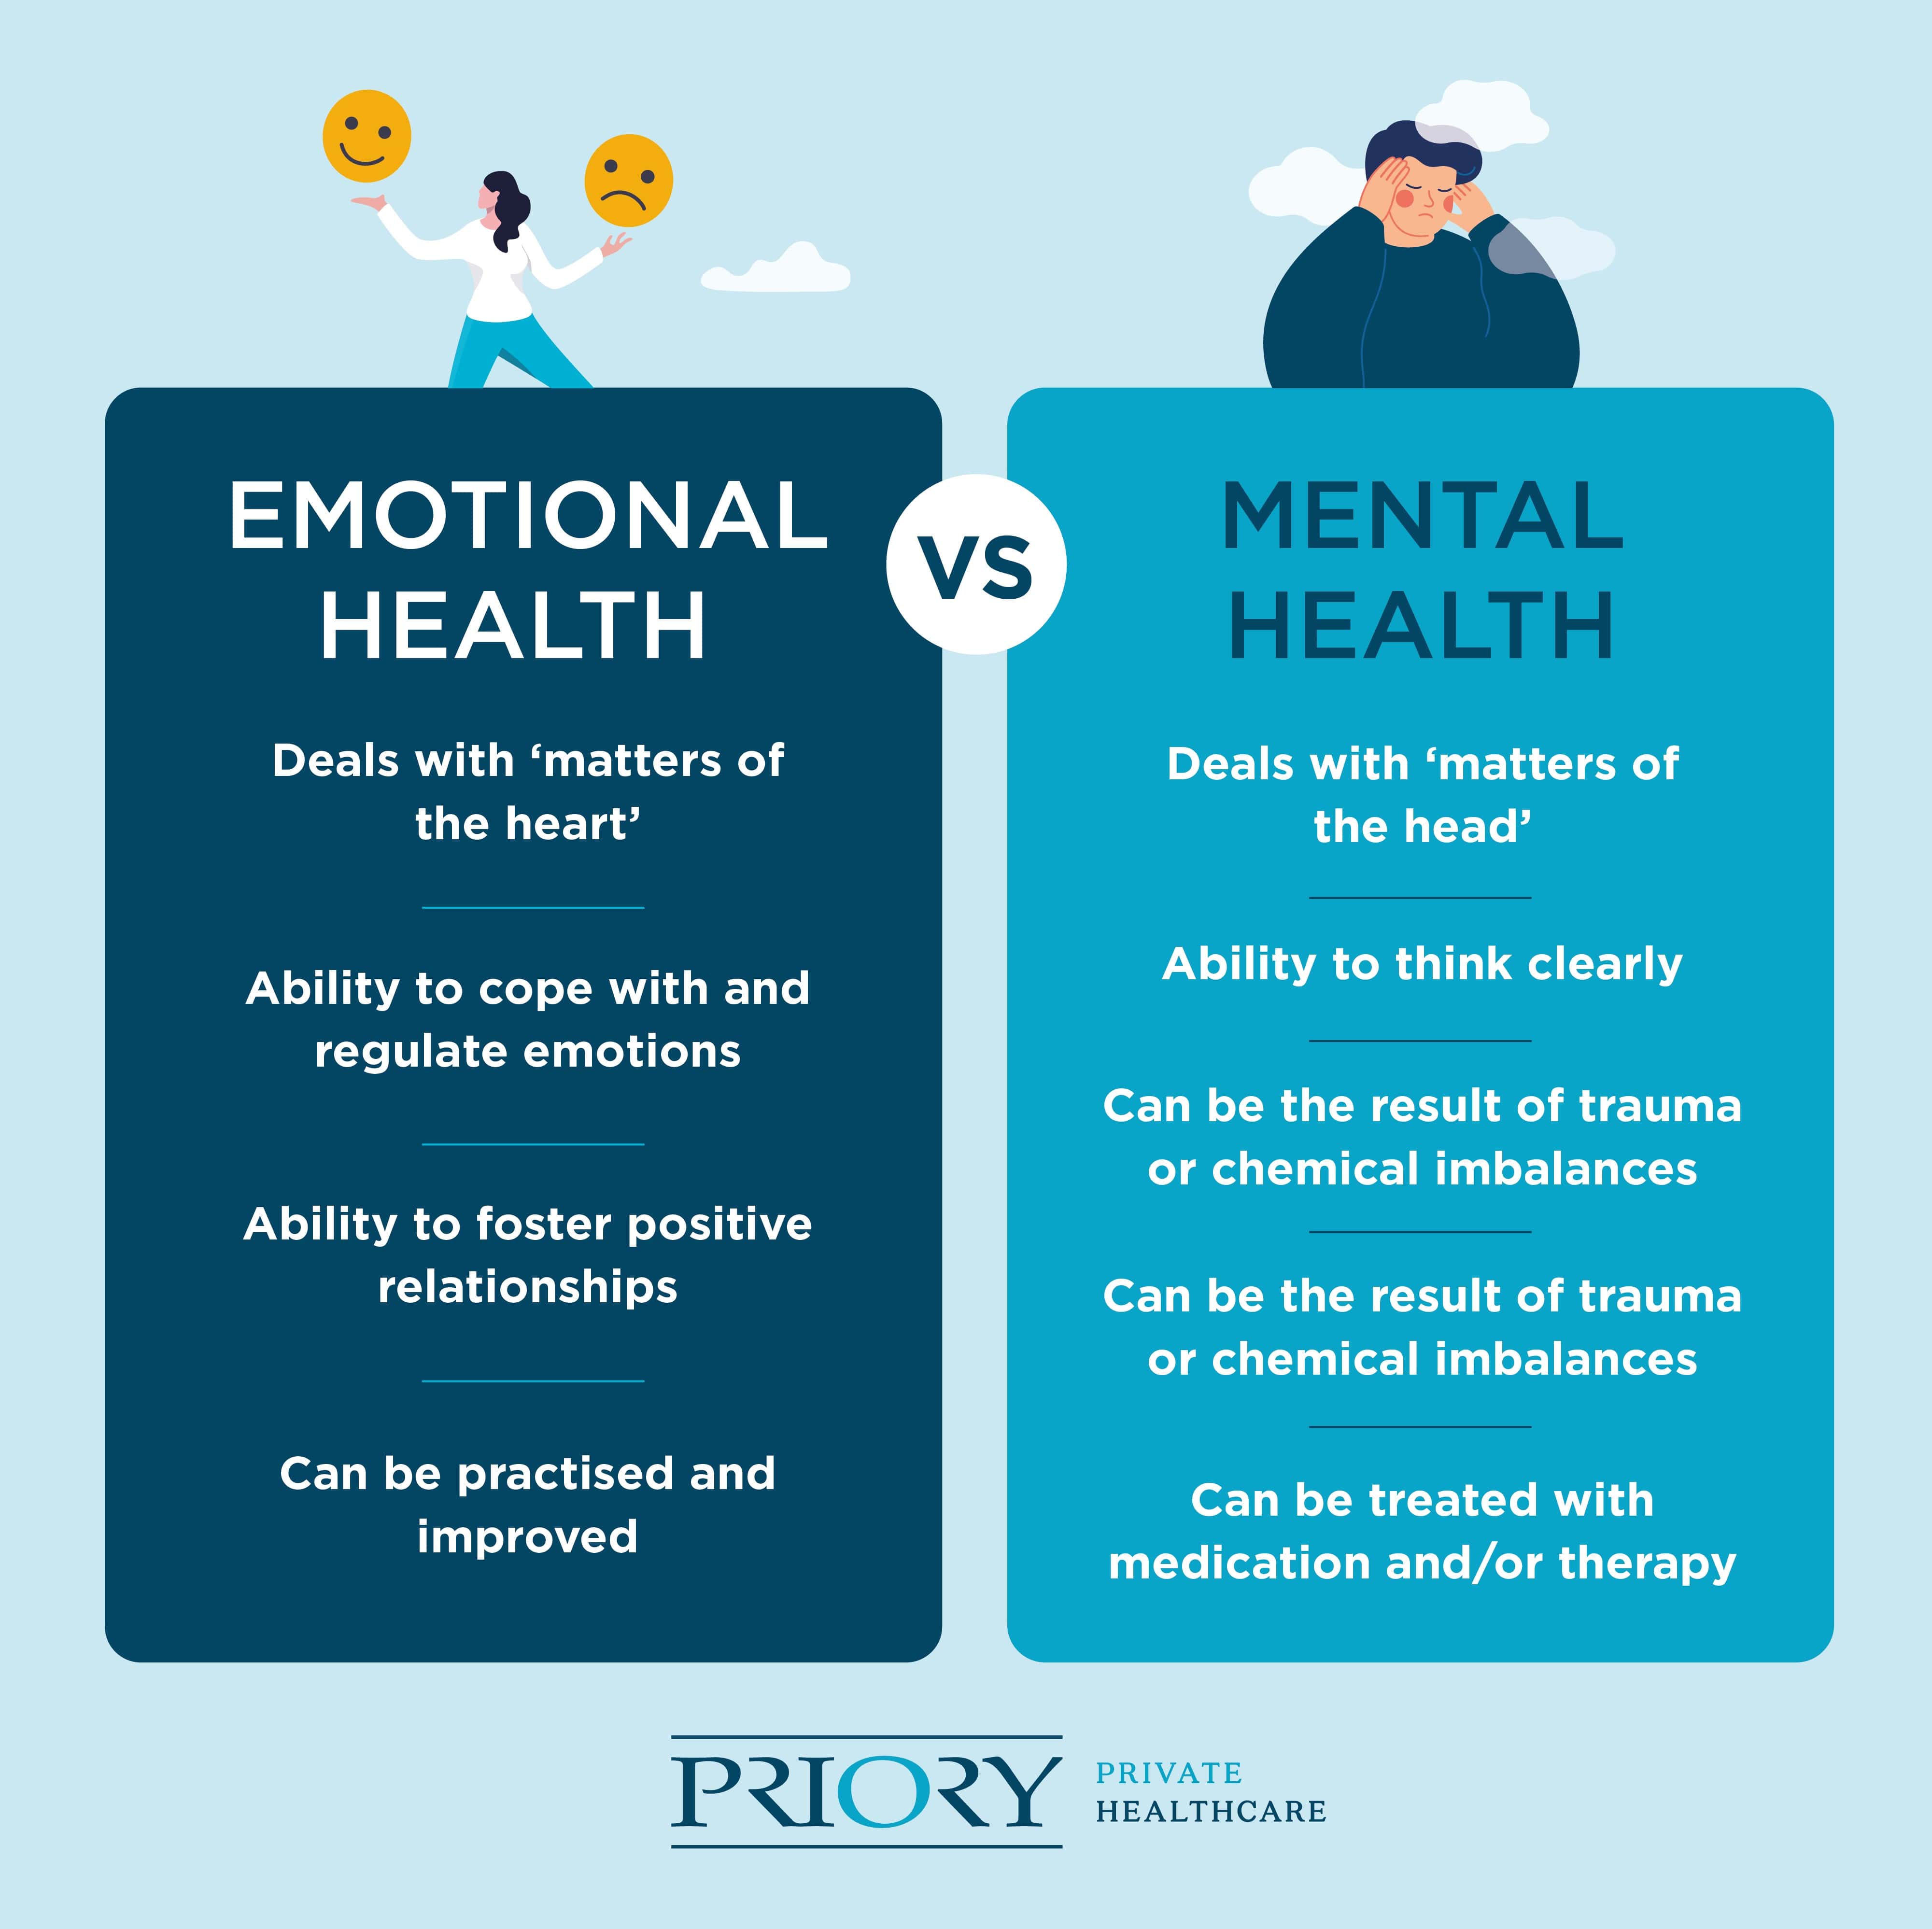 Are emotional health and mental health the same?